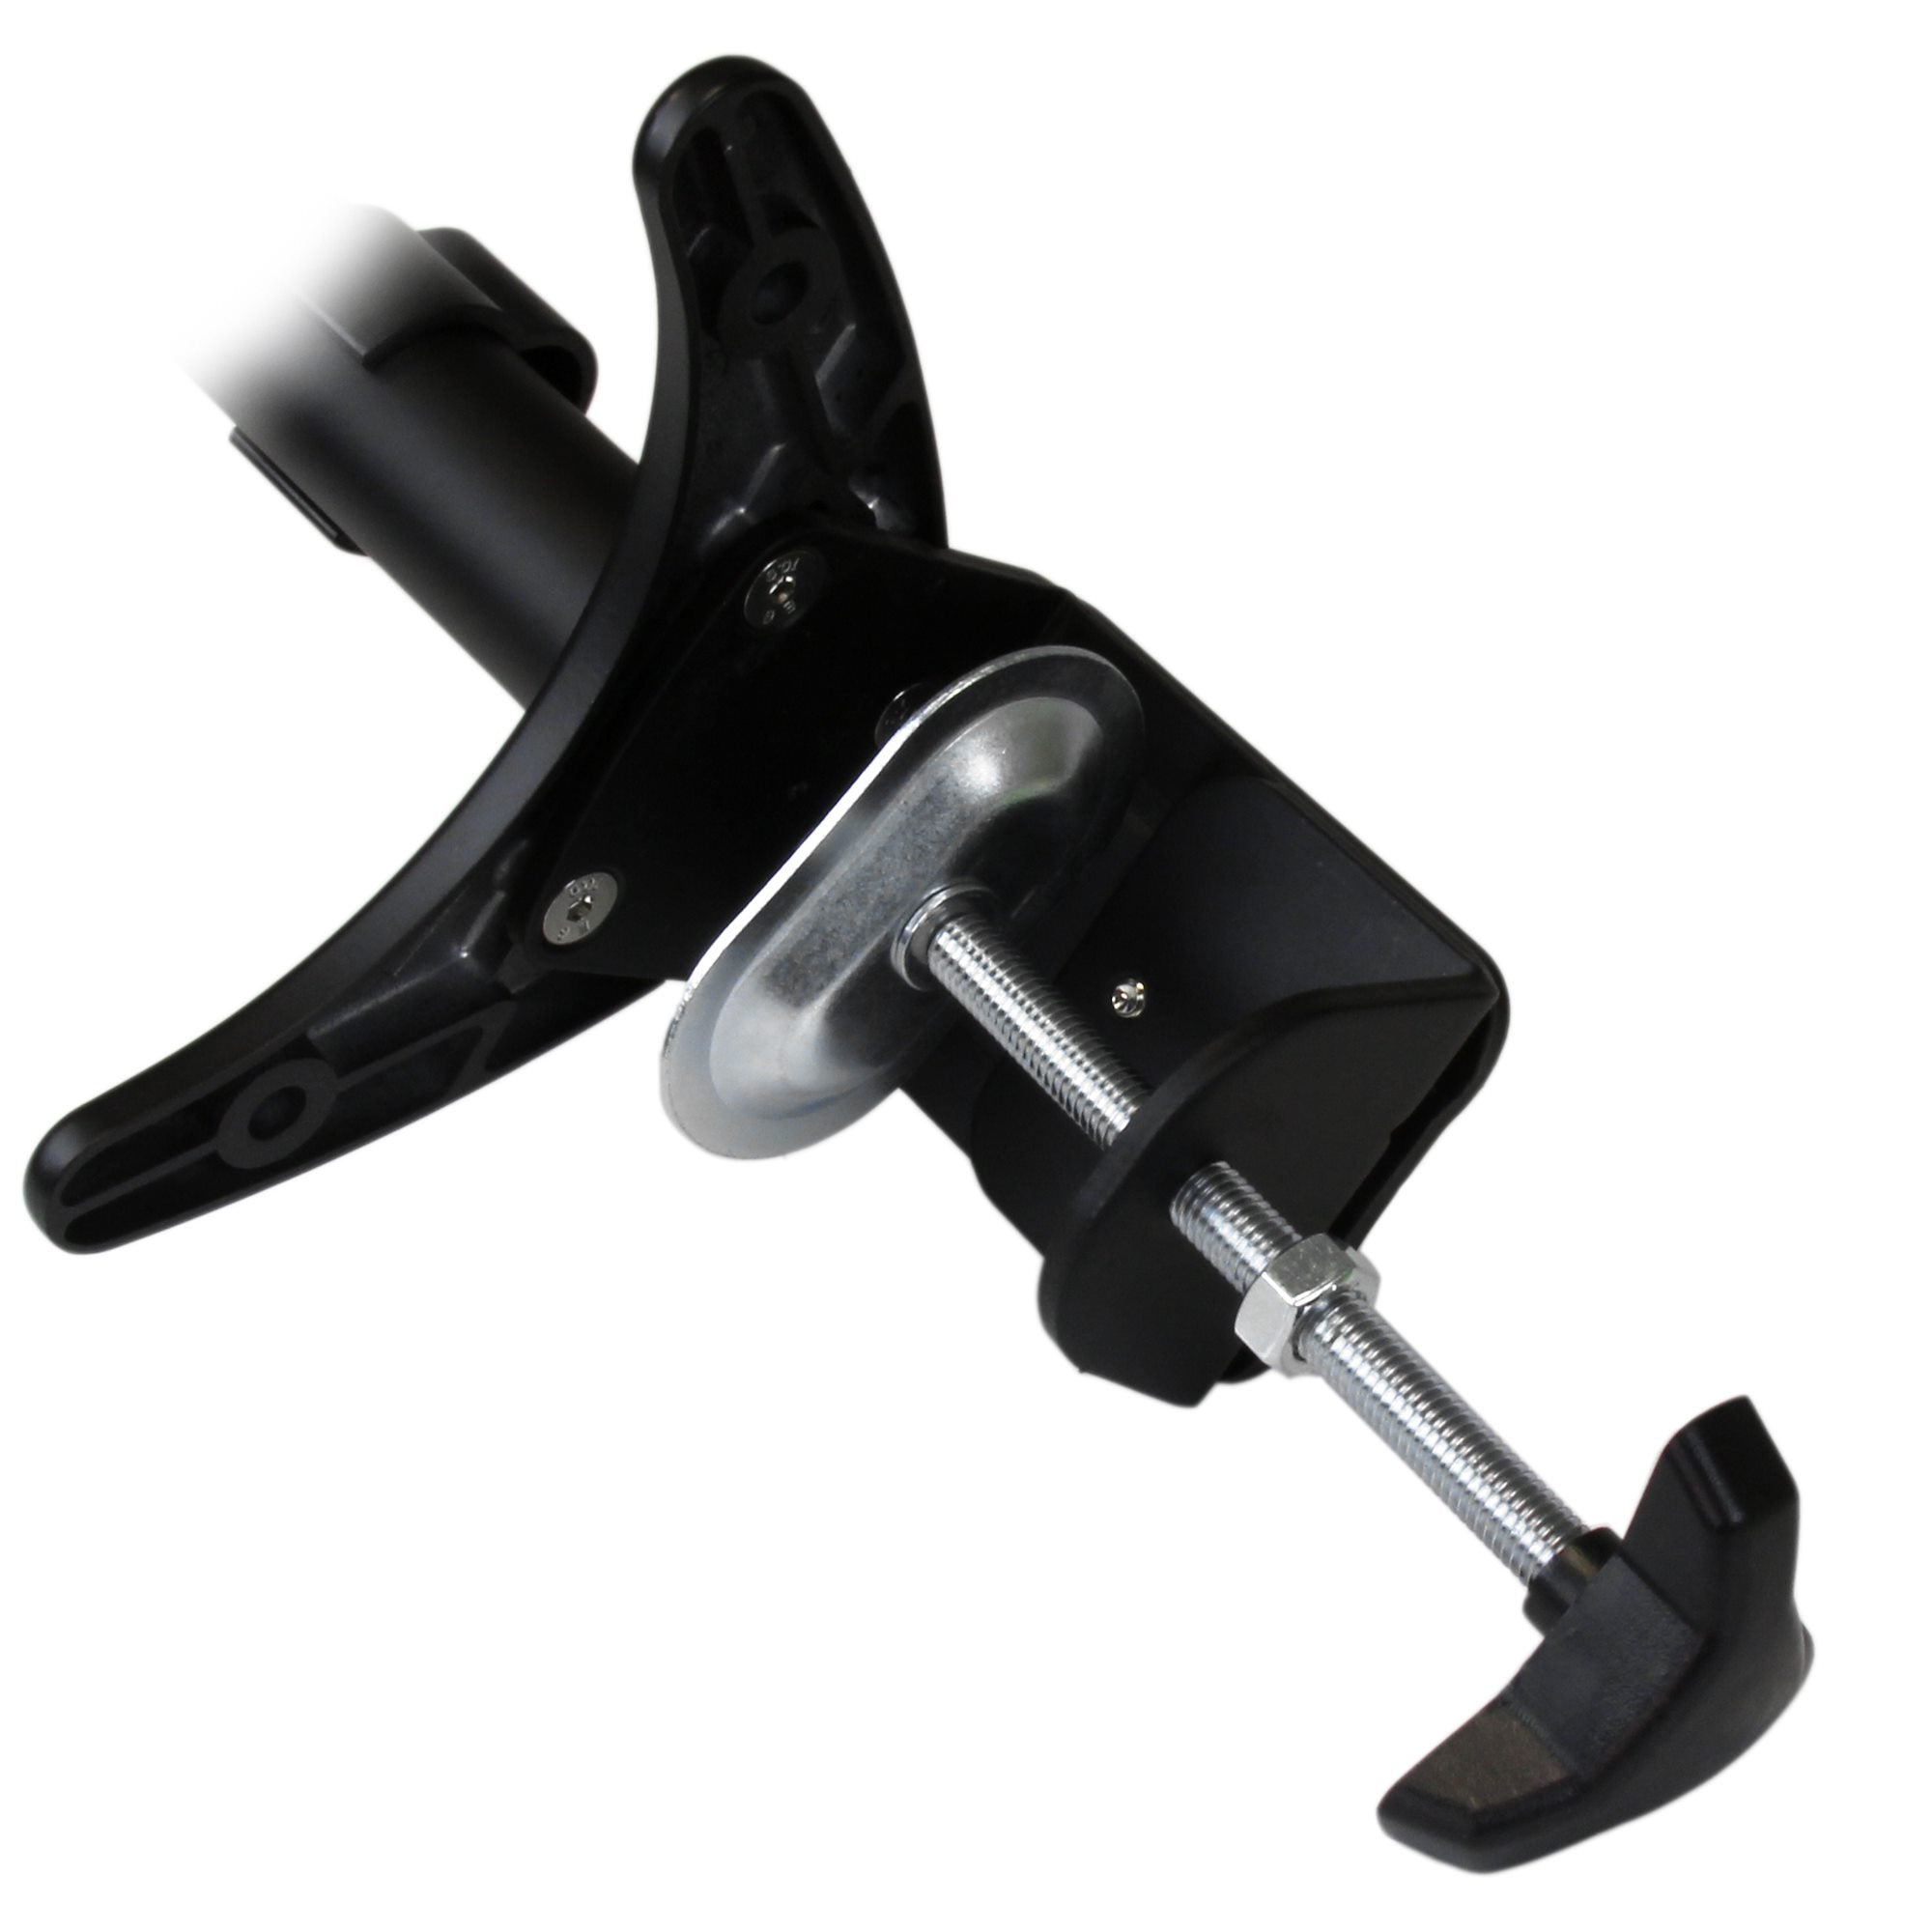 StartTech Dual Clamp-on Monitor Arm, Black - Preowned